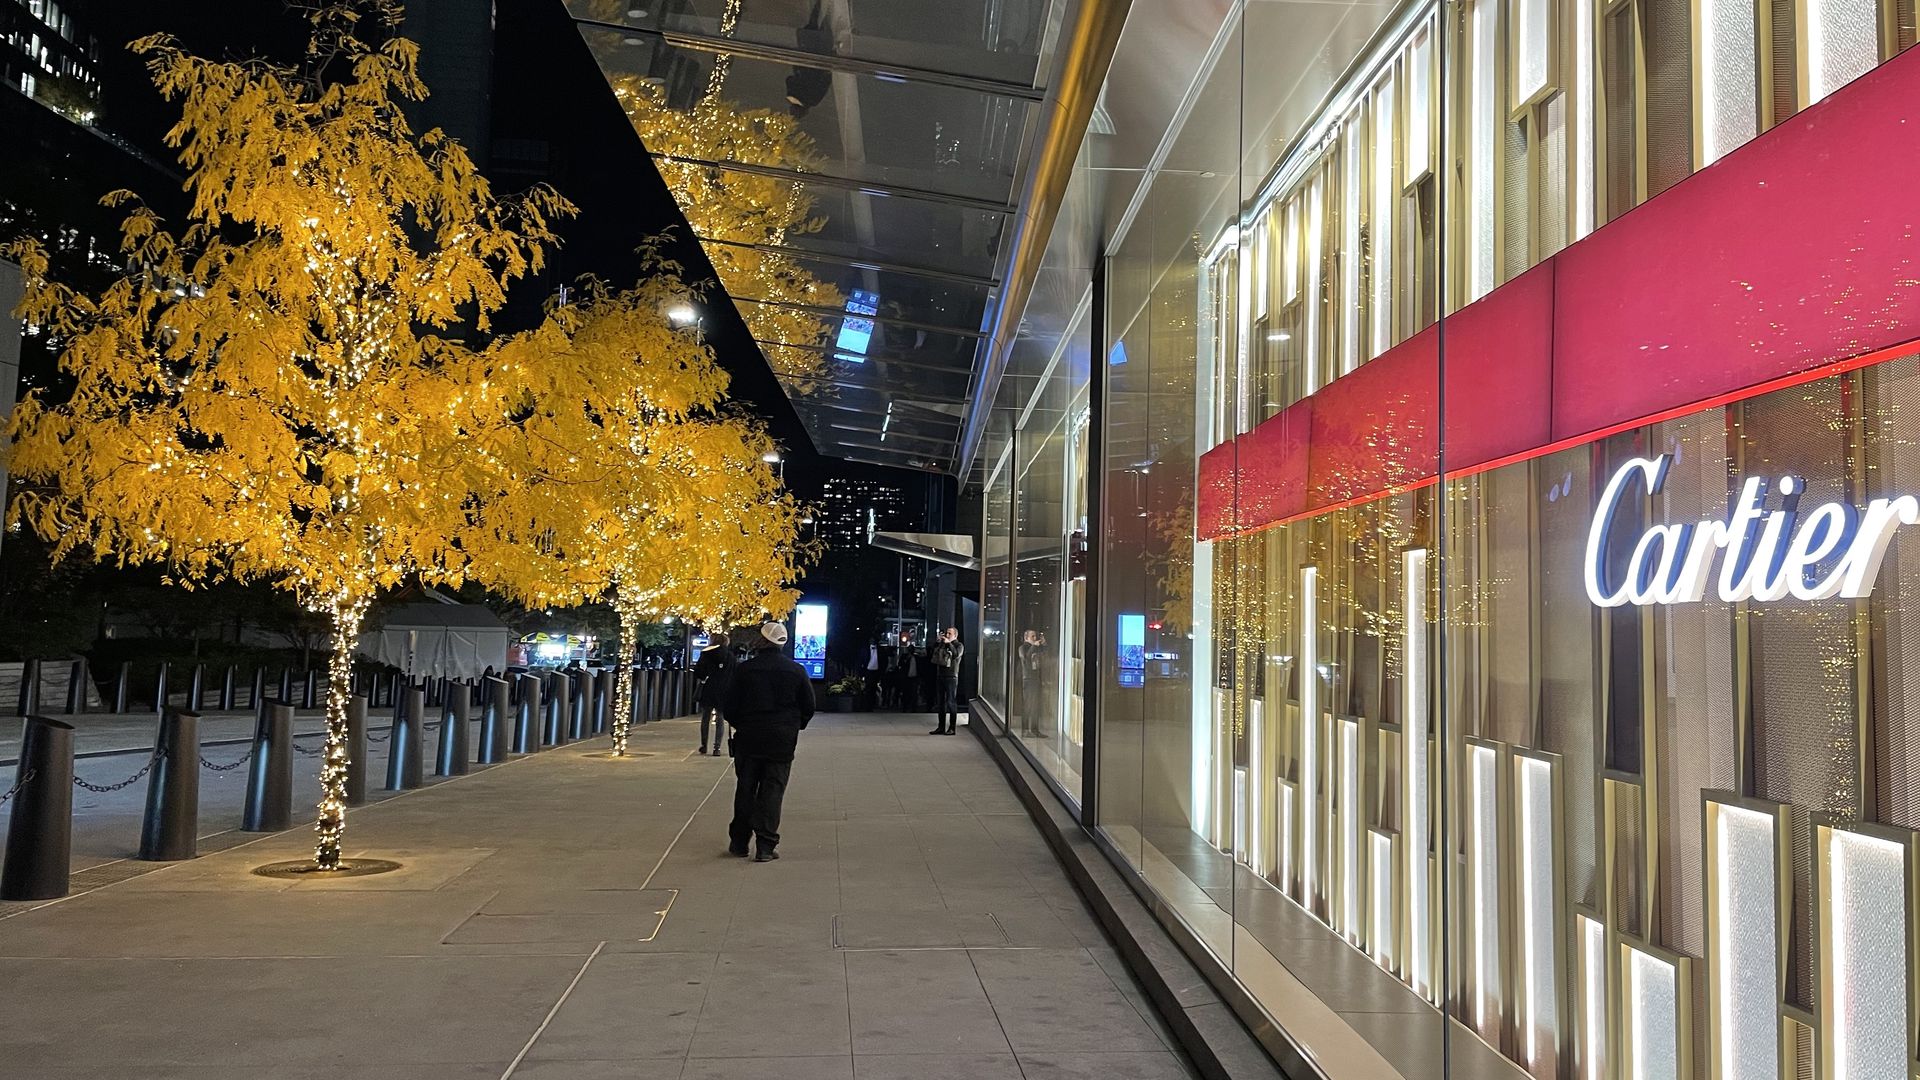 Trees that are elegantly lit for the holiday next to a Cartier store in New York City